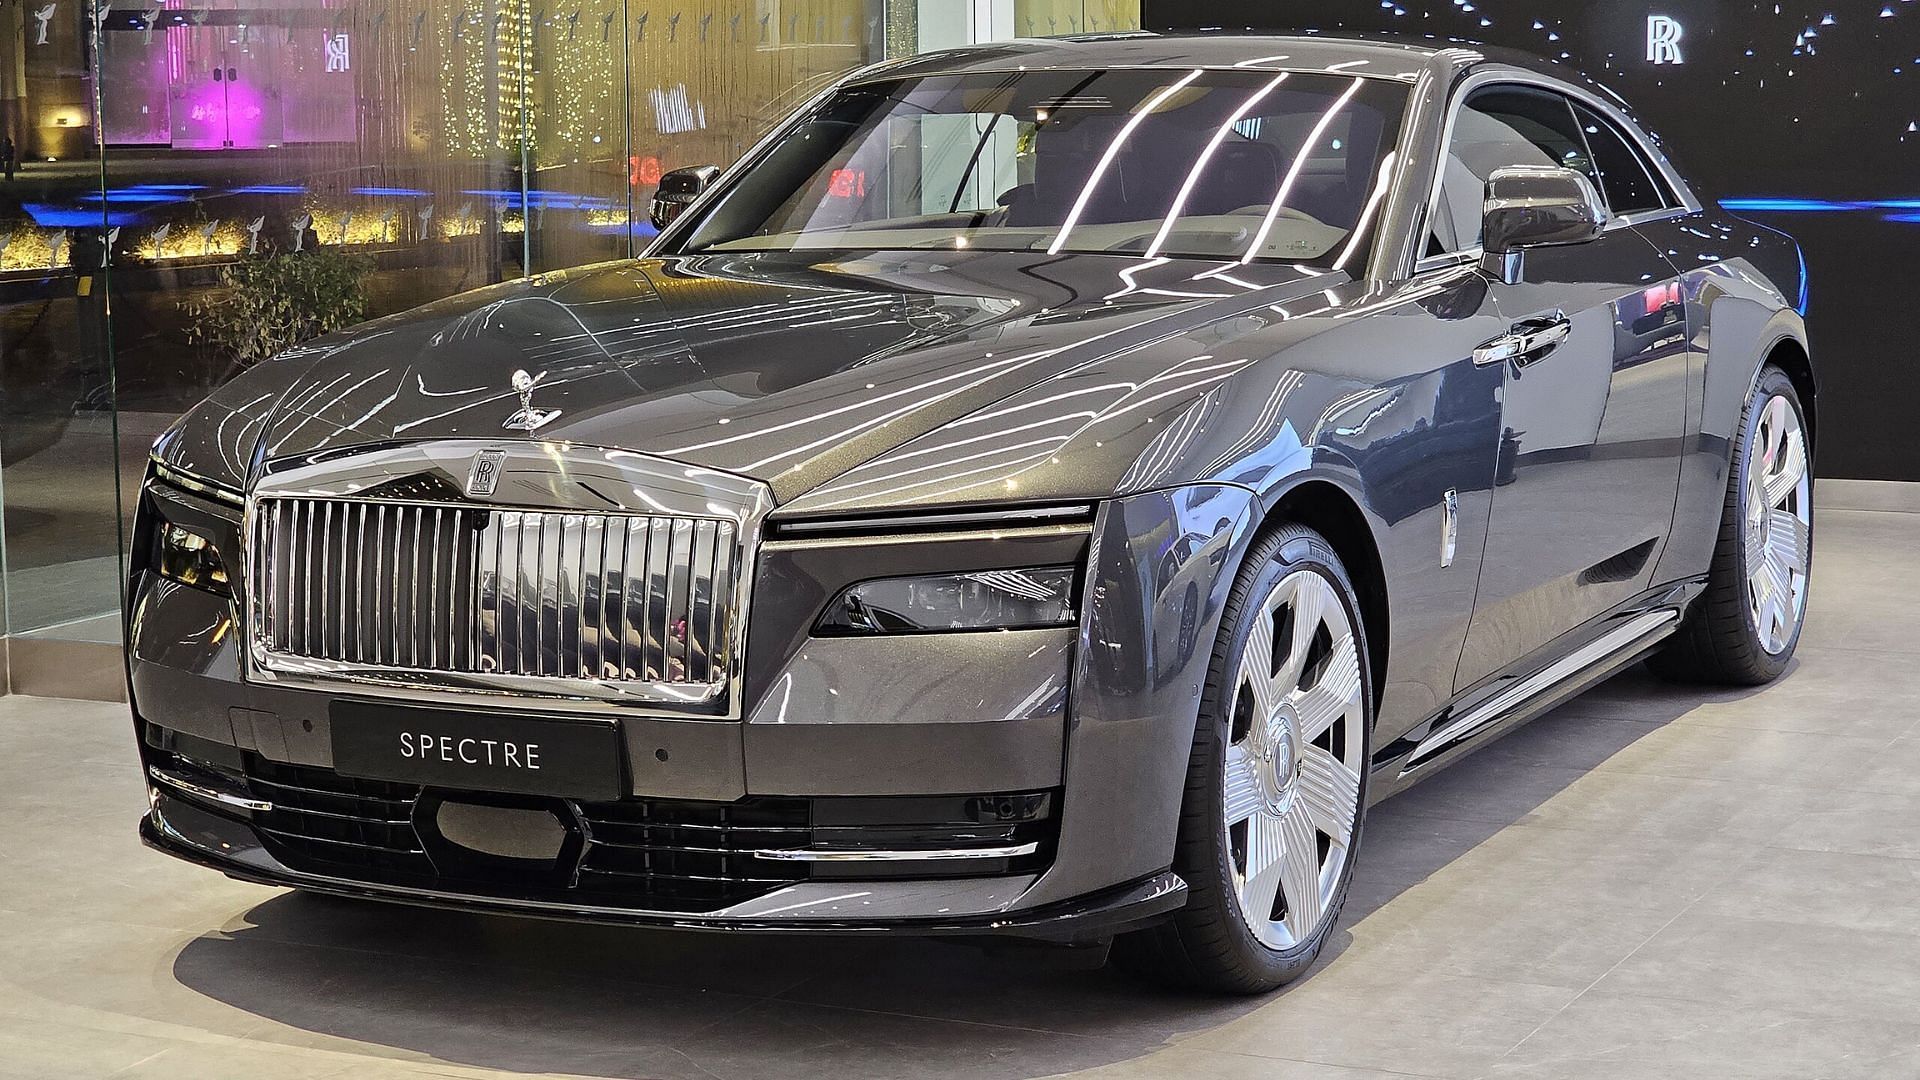 An electric Rolls-Royce is just what GTA 6 needs (Image via Wikipedia)